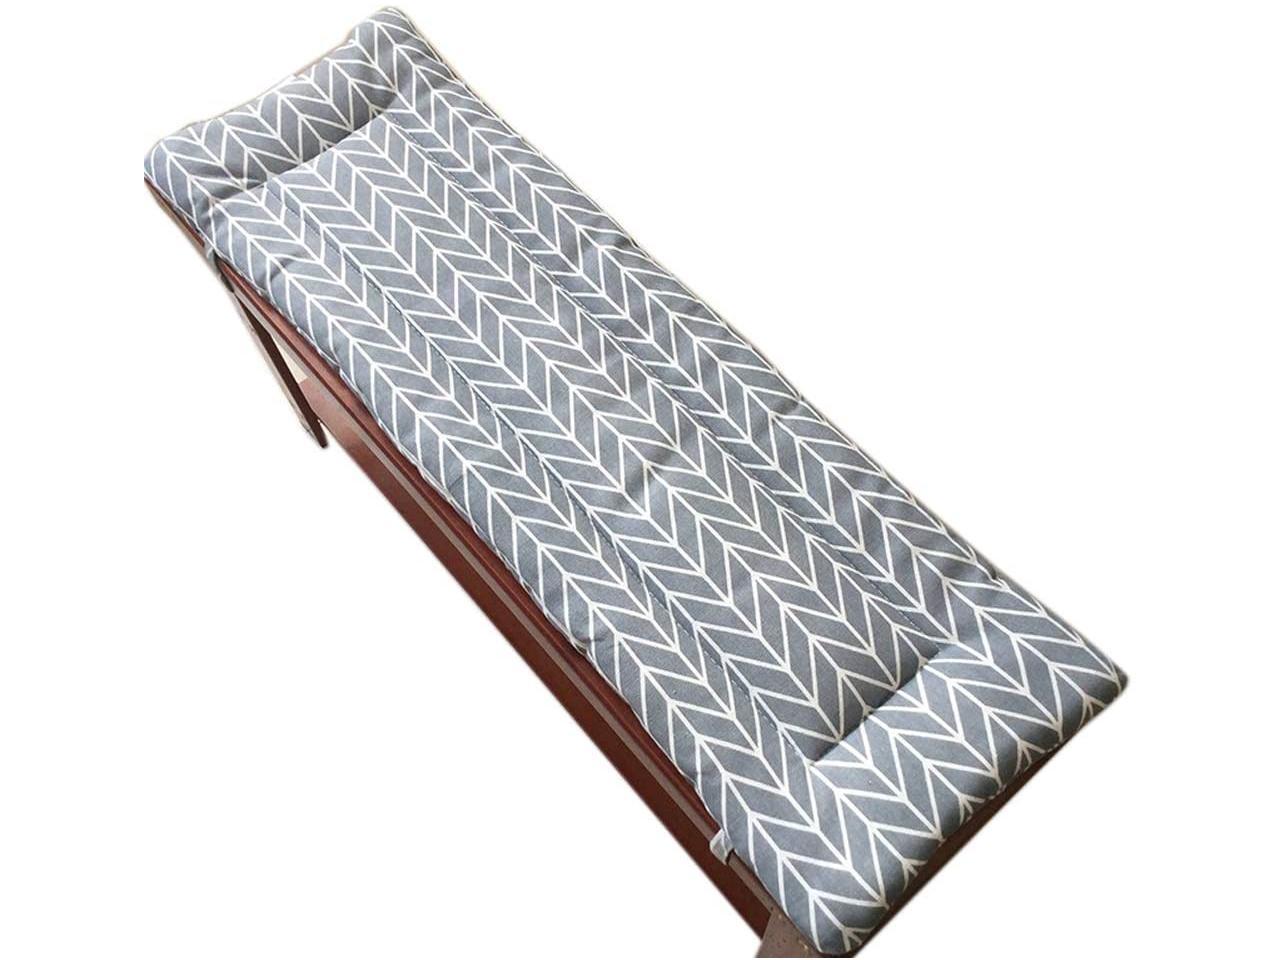 LINGRUI Outdoor Bench Pad Cushion,Bench Cushion Soft Mattress Wood Bench Anti-slip Long Seat Pad for Swing or Garden Bench 2 3 Seater Chair,Washable